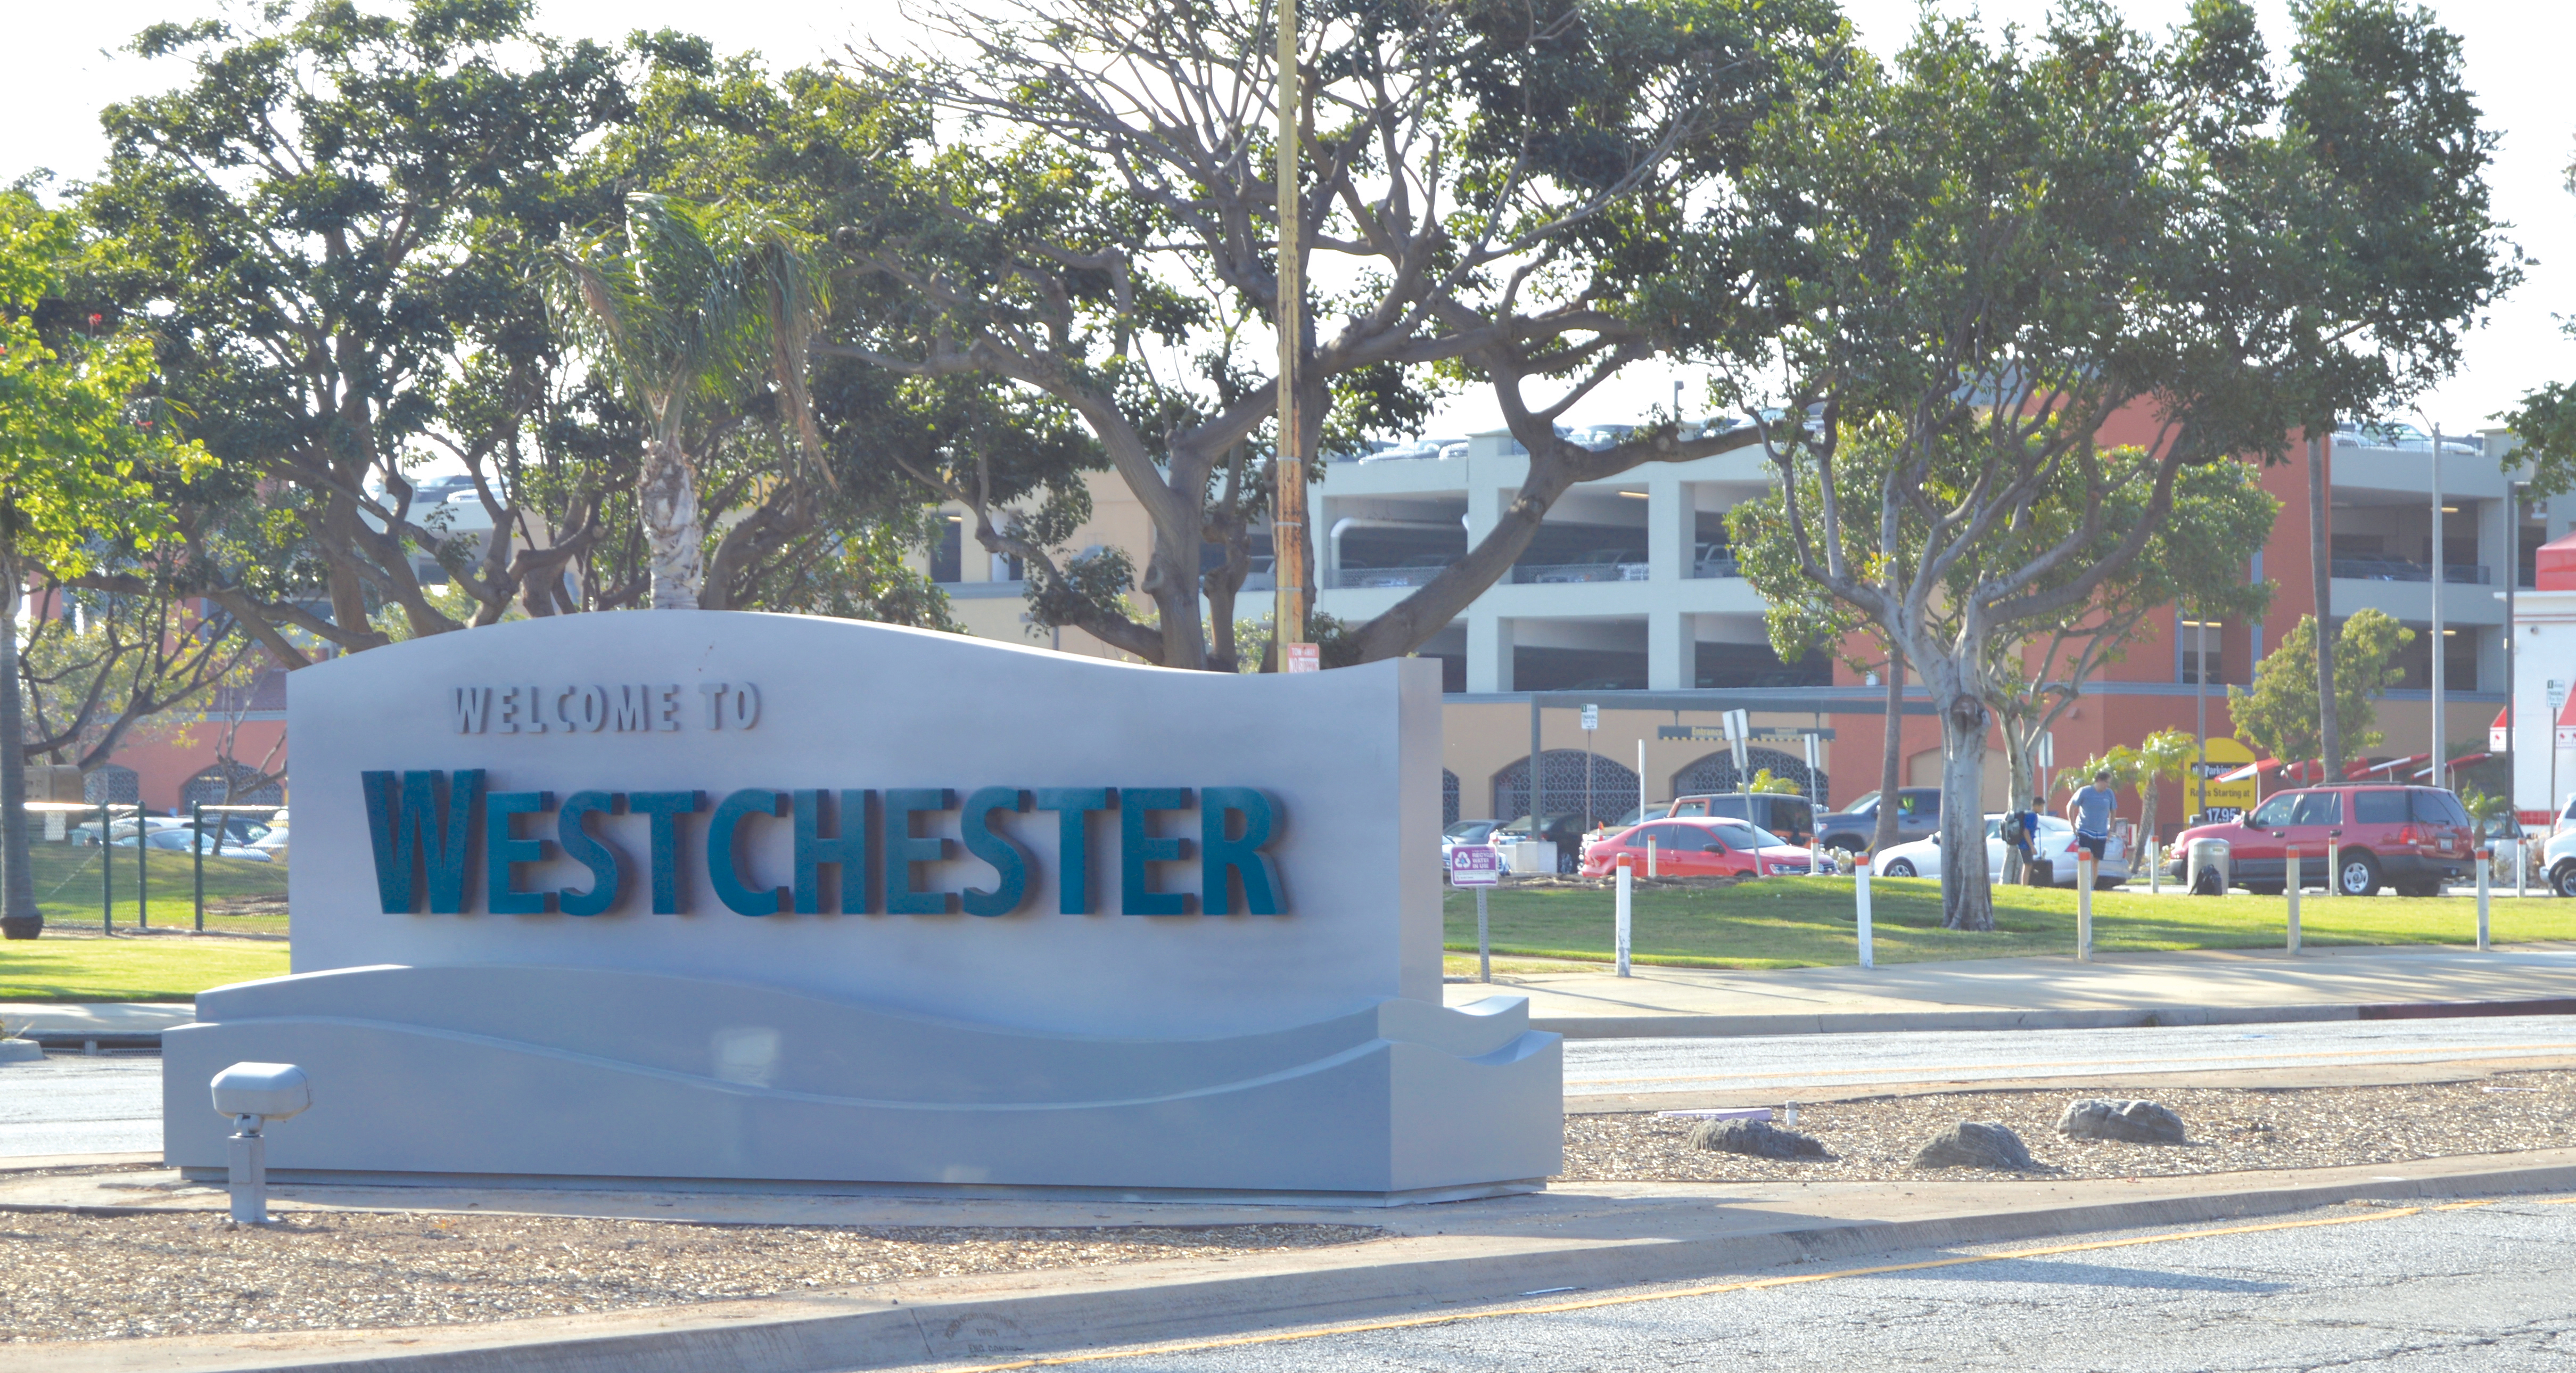 75 Things We love about Westchester!